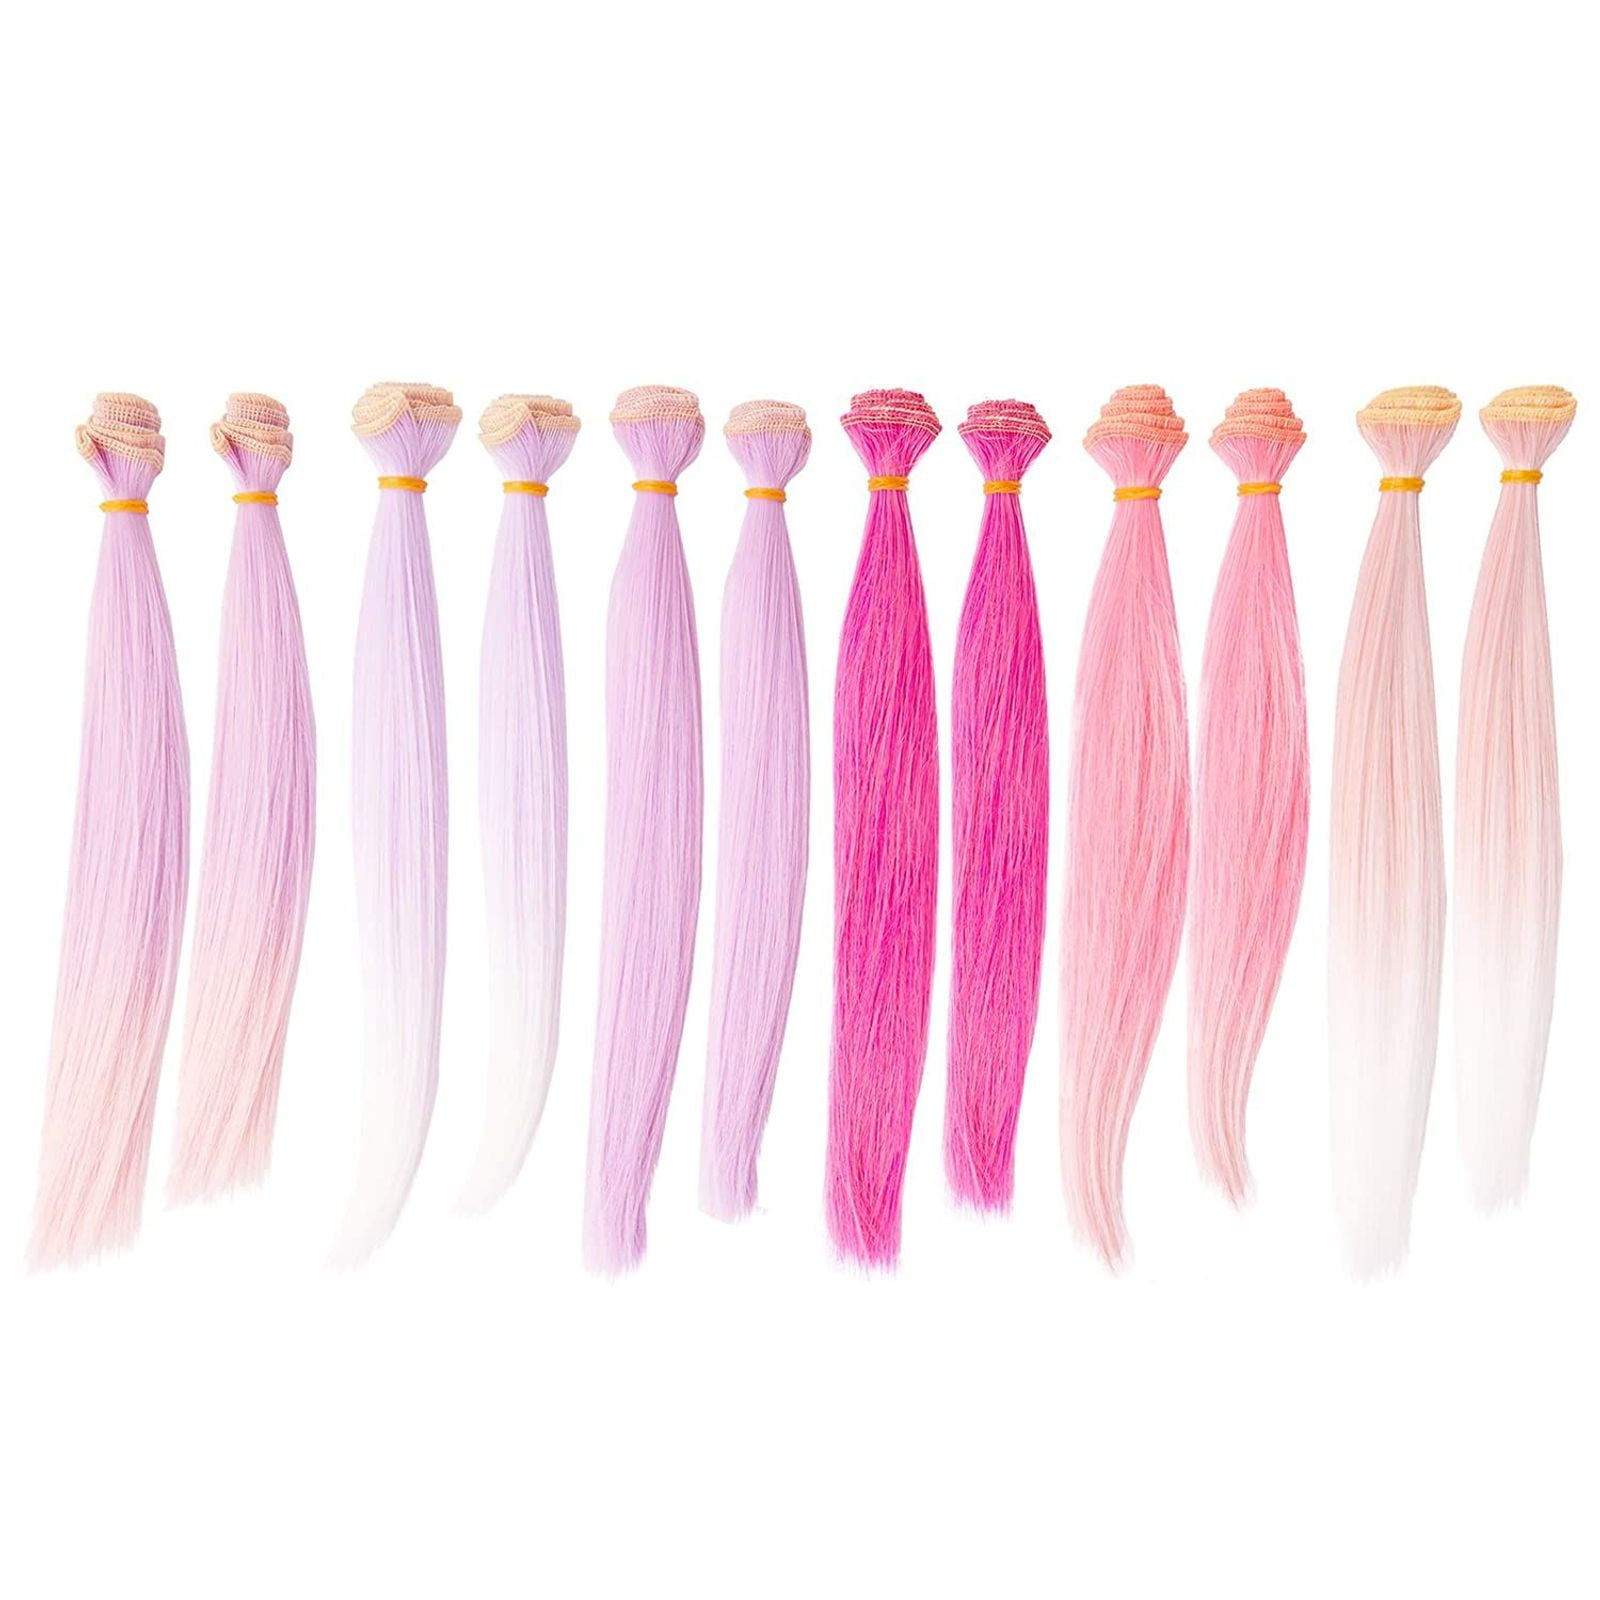 Horizontal Length 100cm Doll Accessories Straight Synthetic Fiber Wig Hair For Doll Wigs High-temperature Wire 16 colors style 2 16PCs/pack Length 15cm